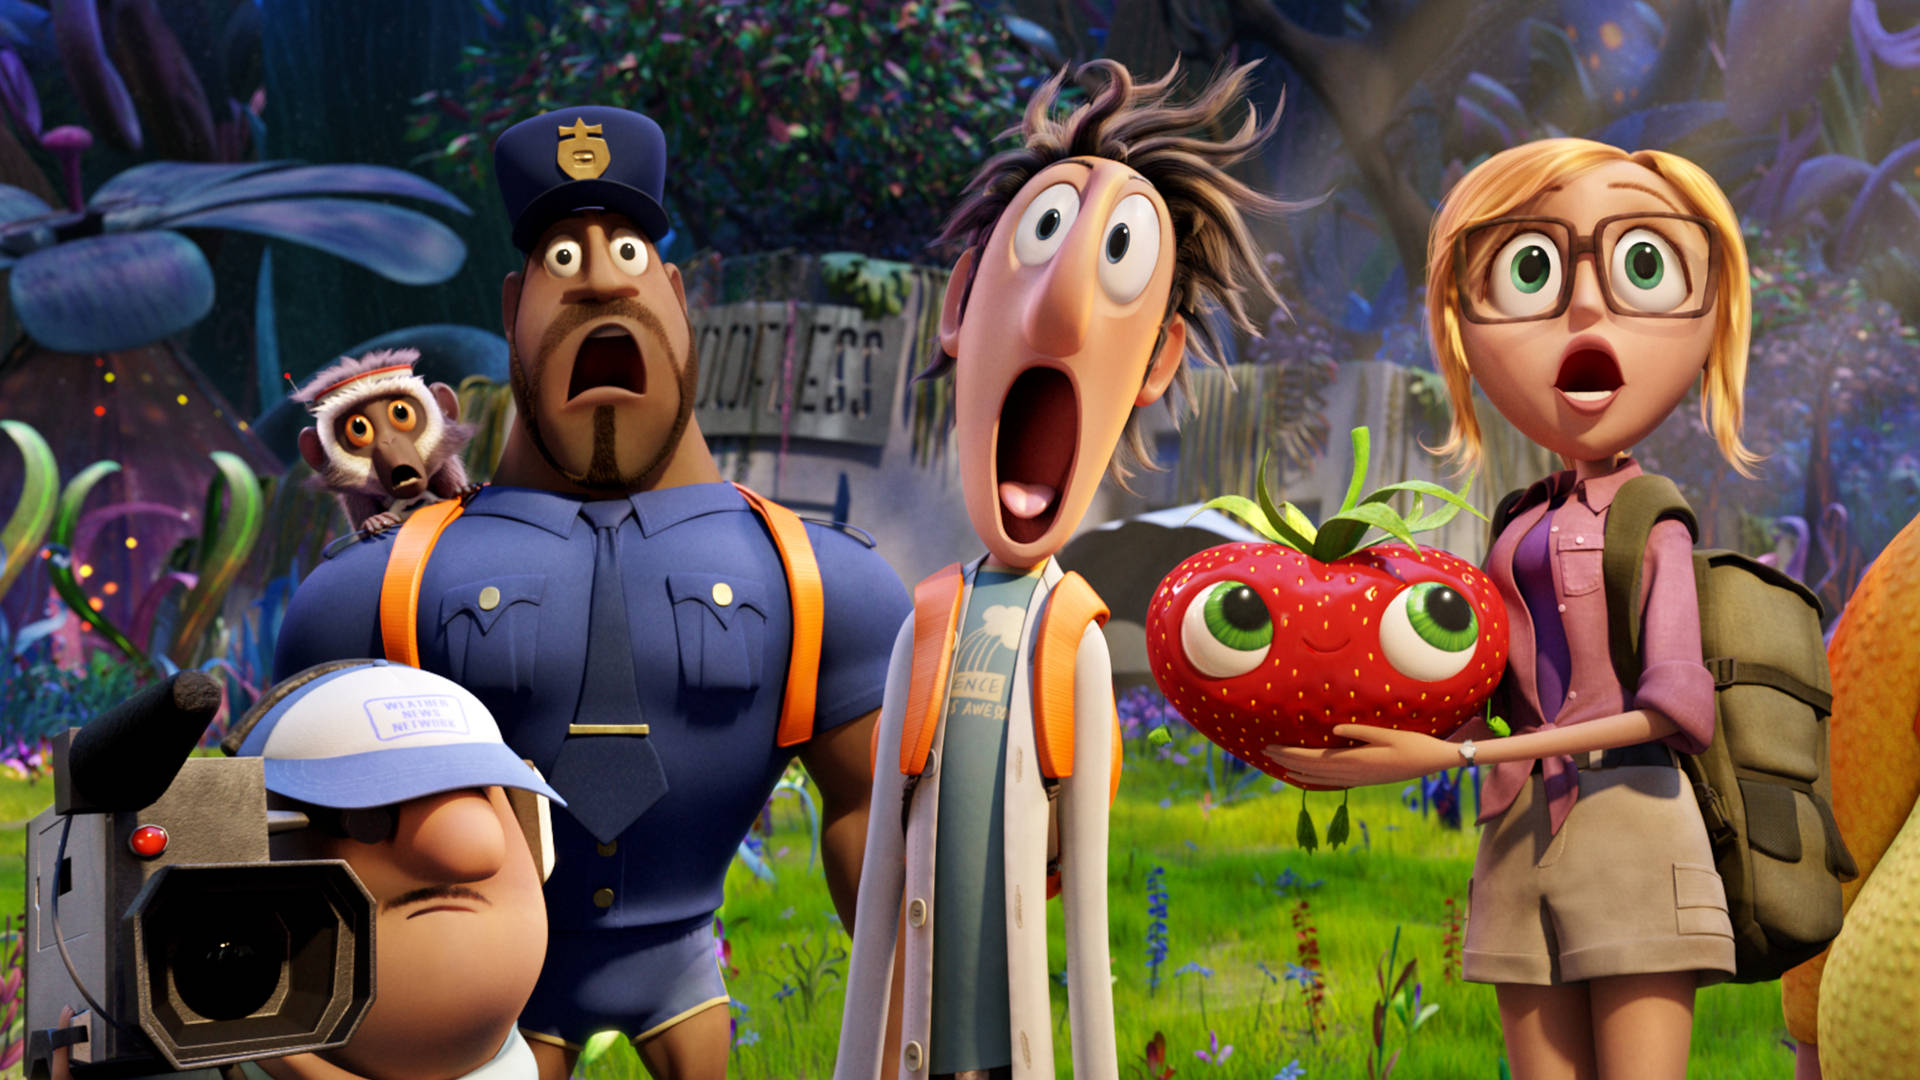 Shocked Characters from Cloudy With A Chance Of Meatballs 2 Wallpaper